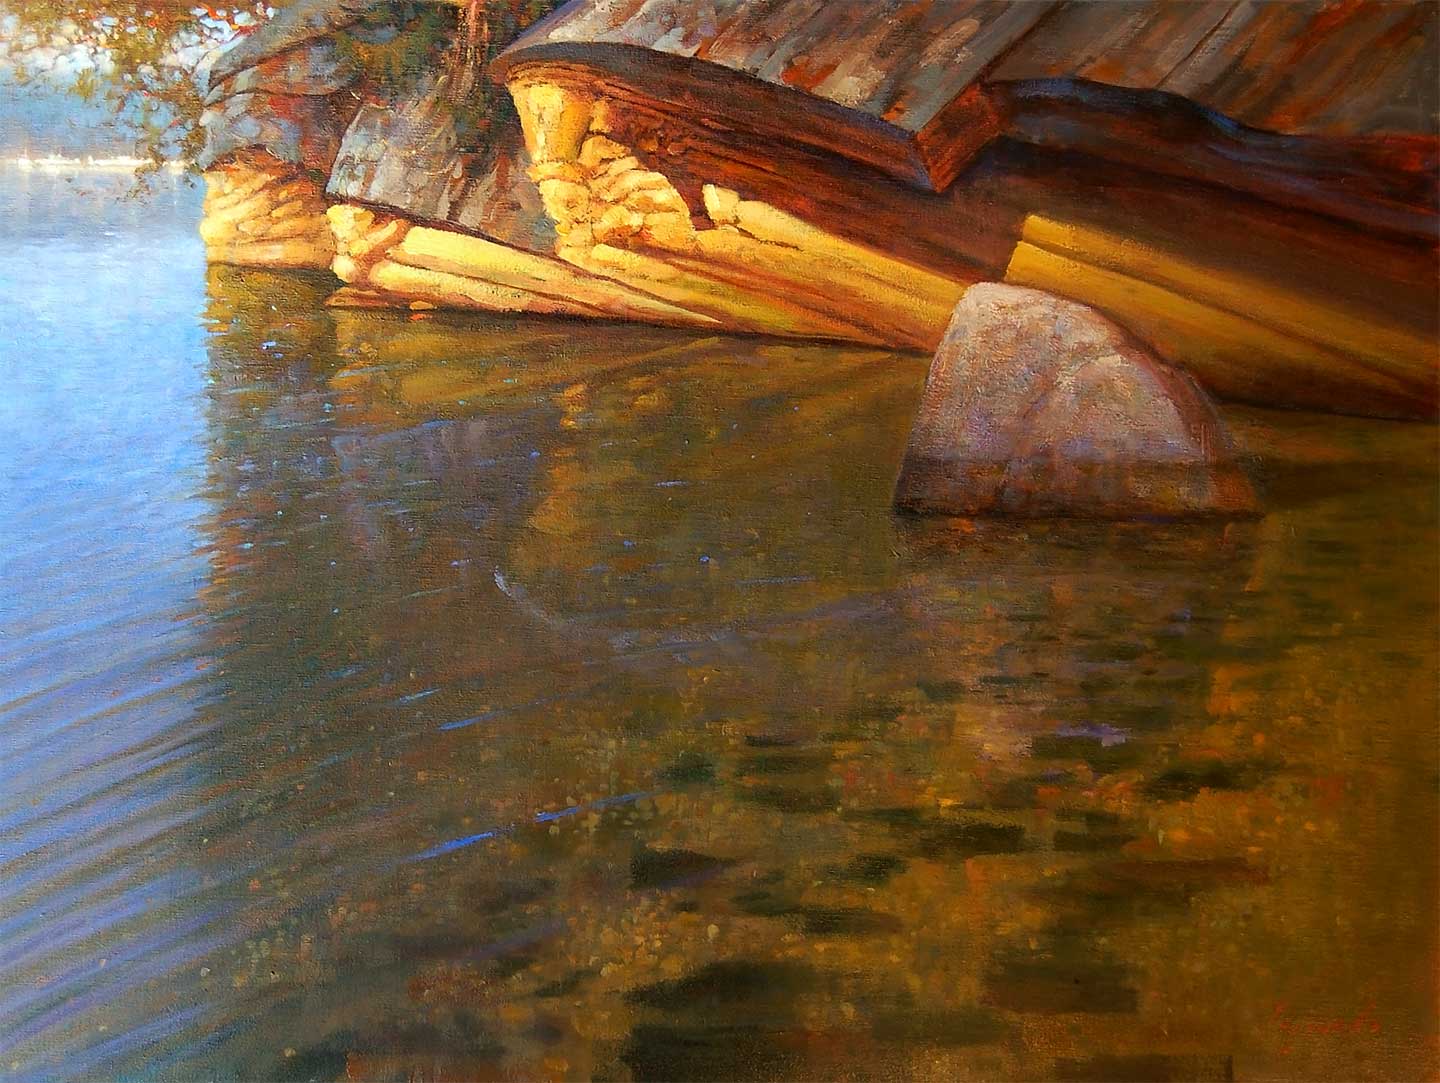 'Sandstone Shallows' 30 X 40 in. oil on canvas. studio. copyright Brent Lynch